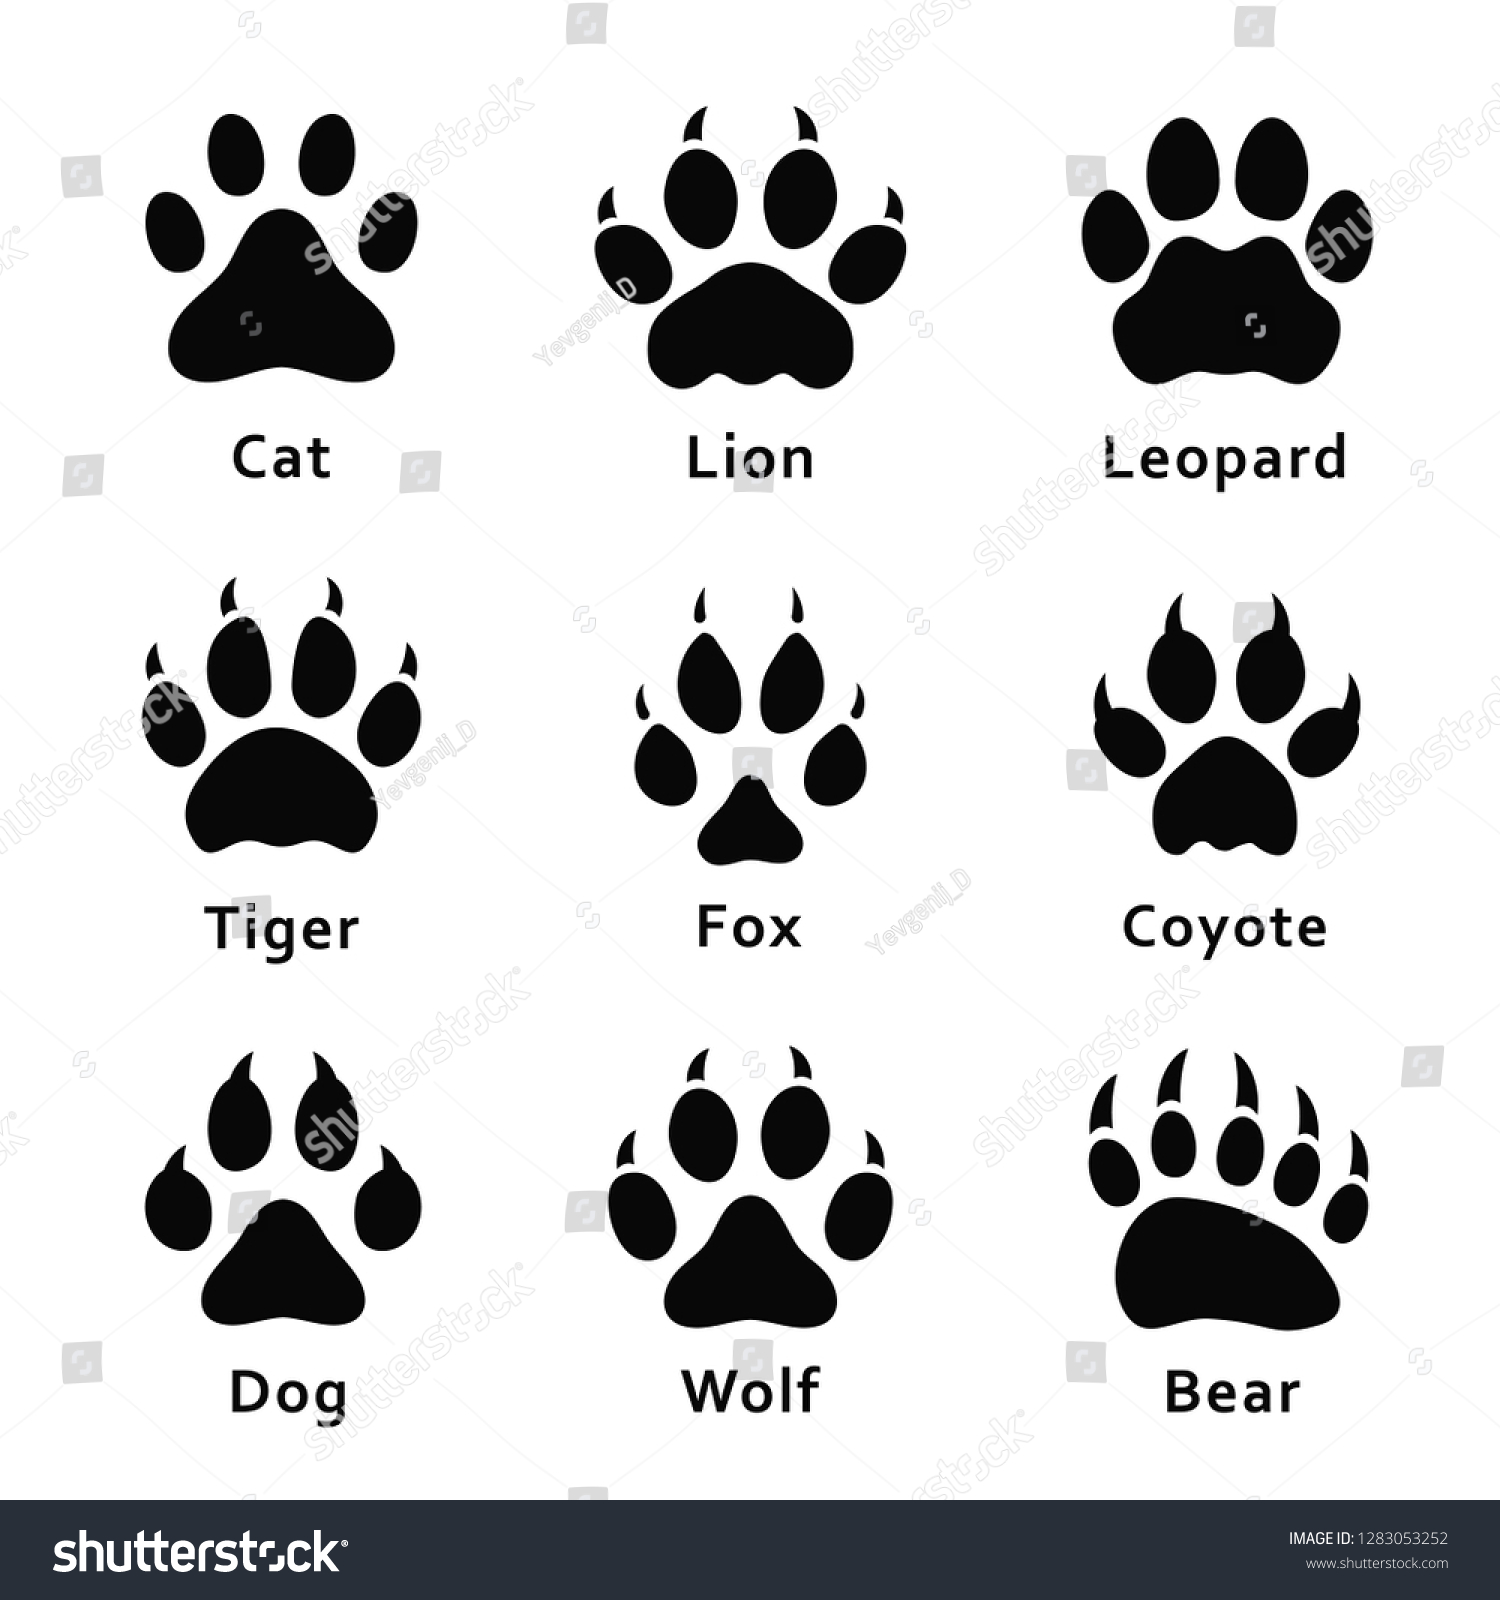 SVG of Animals footprints, paw prints. Set of different animals and predators footprints and traces. Cat, lion, leopard, tiger, fox, wolf, coyote, dog, bear. Vector svg